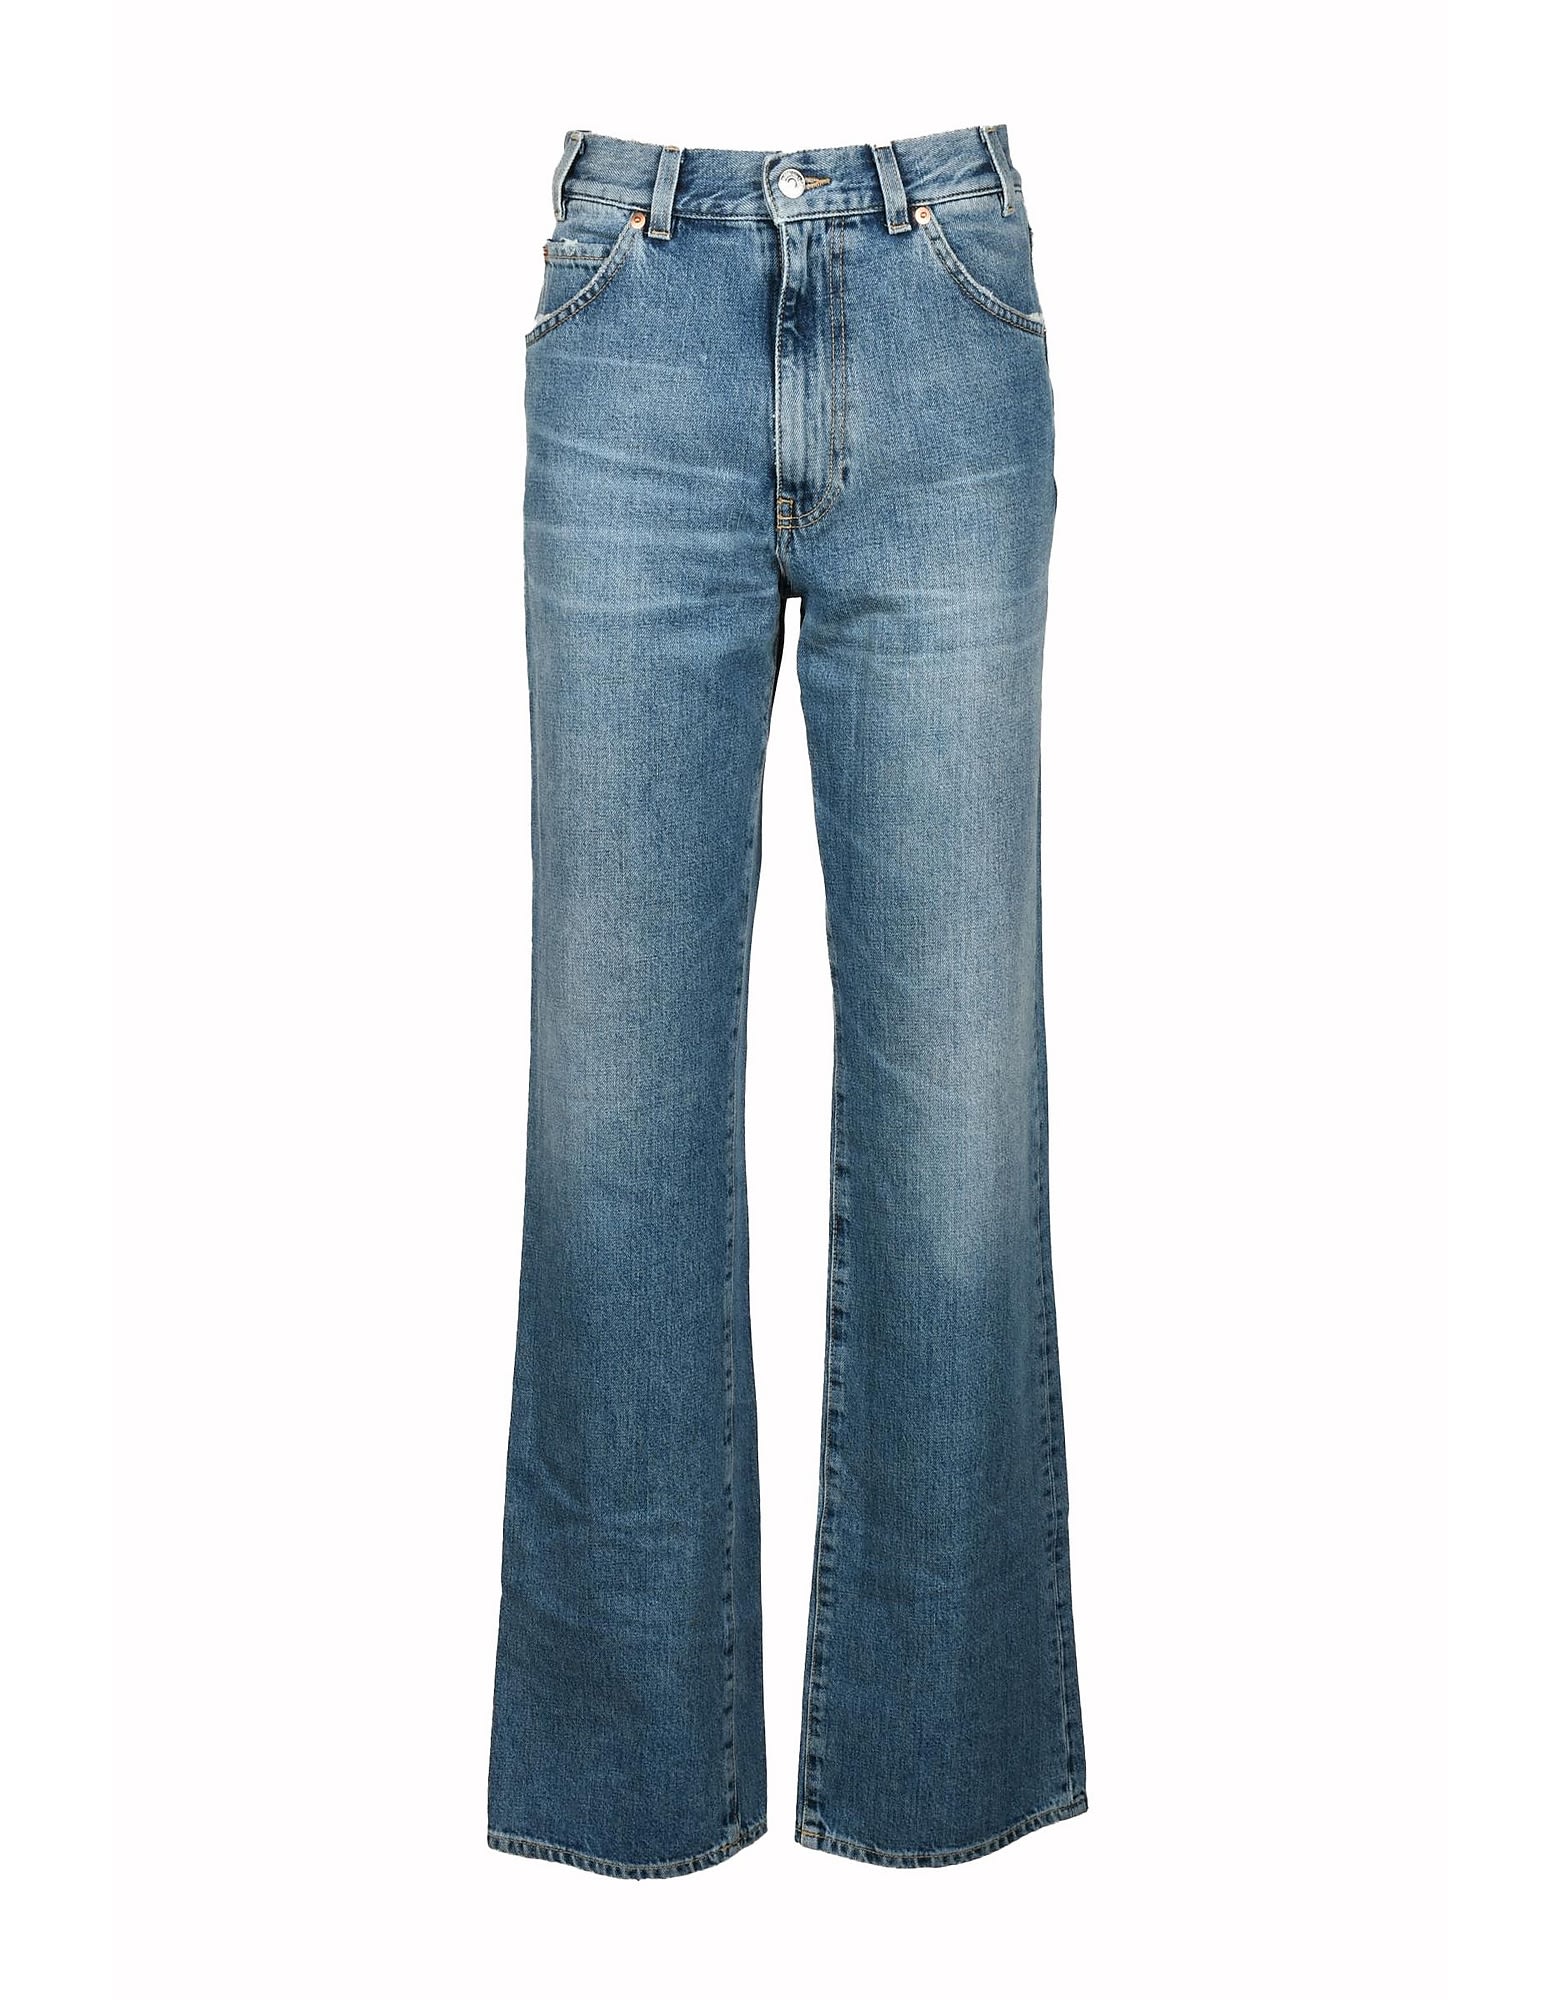 MAURO GRIFONI WOMENS BLUE JEANS